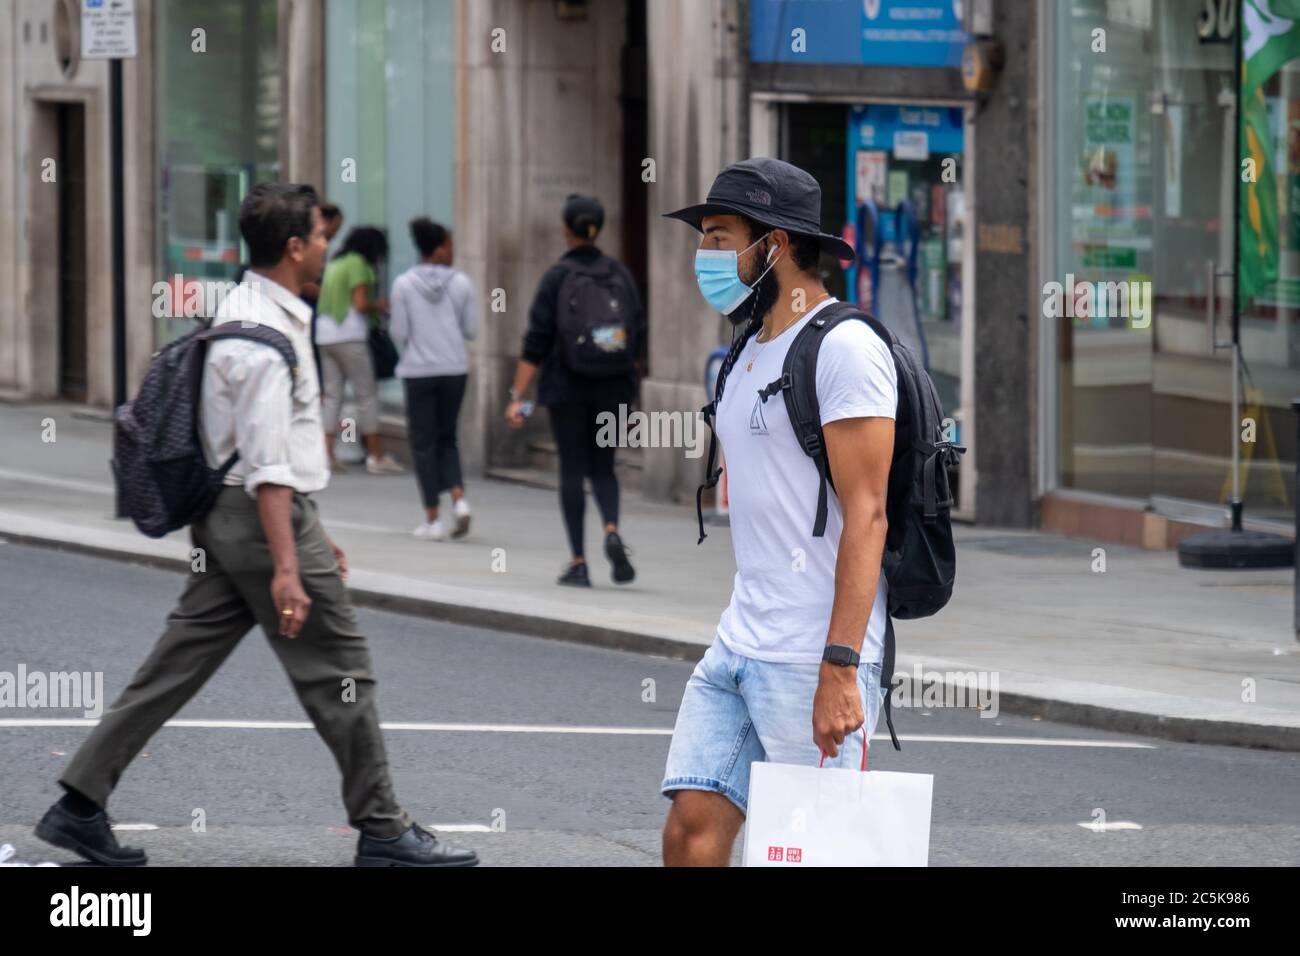 Shoppers return to Oxford Street, London after Coronavirus lockdown is lifted Stock Photo